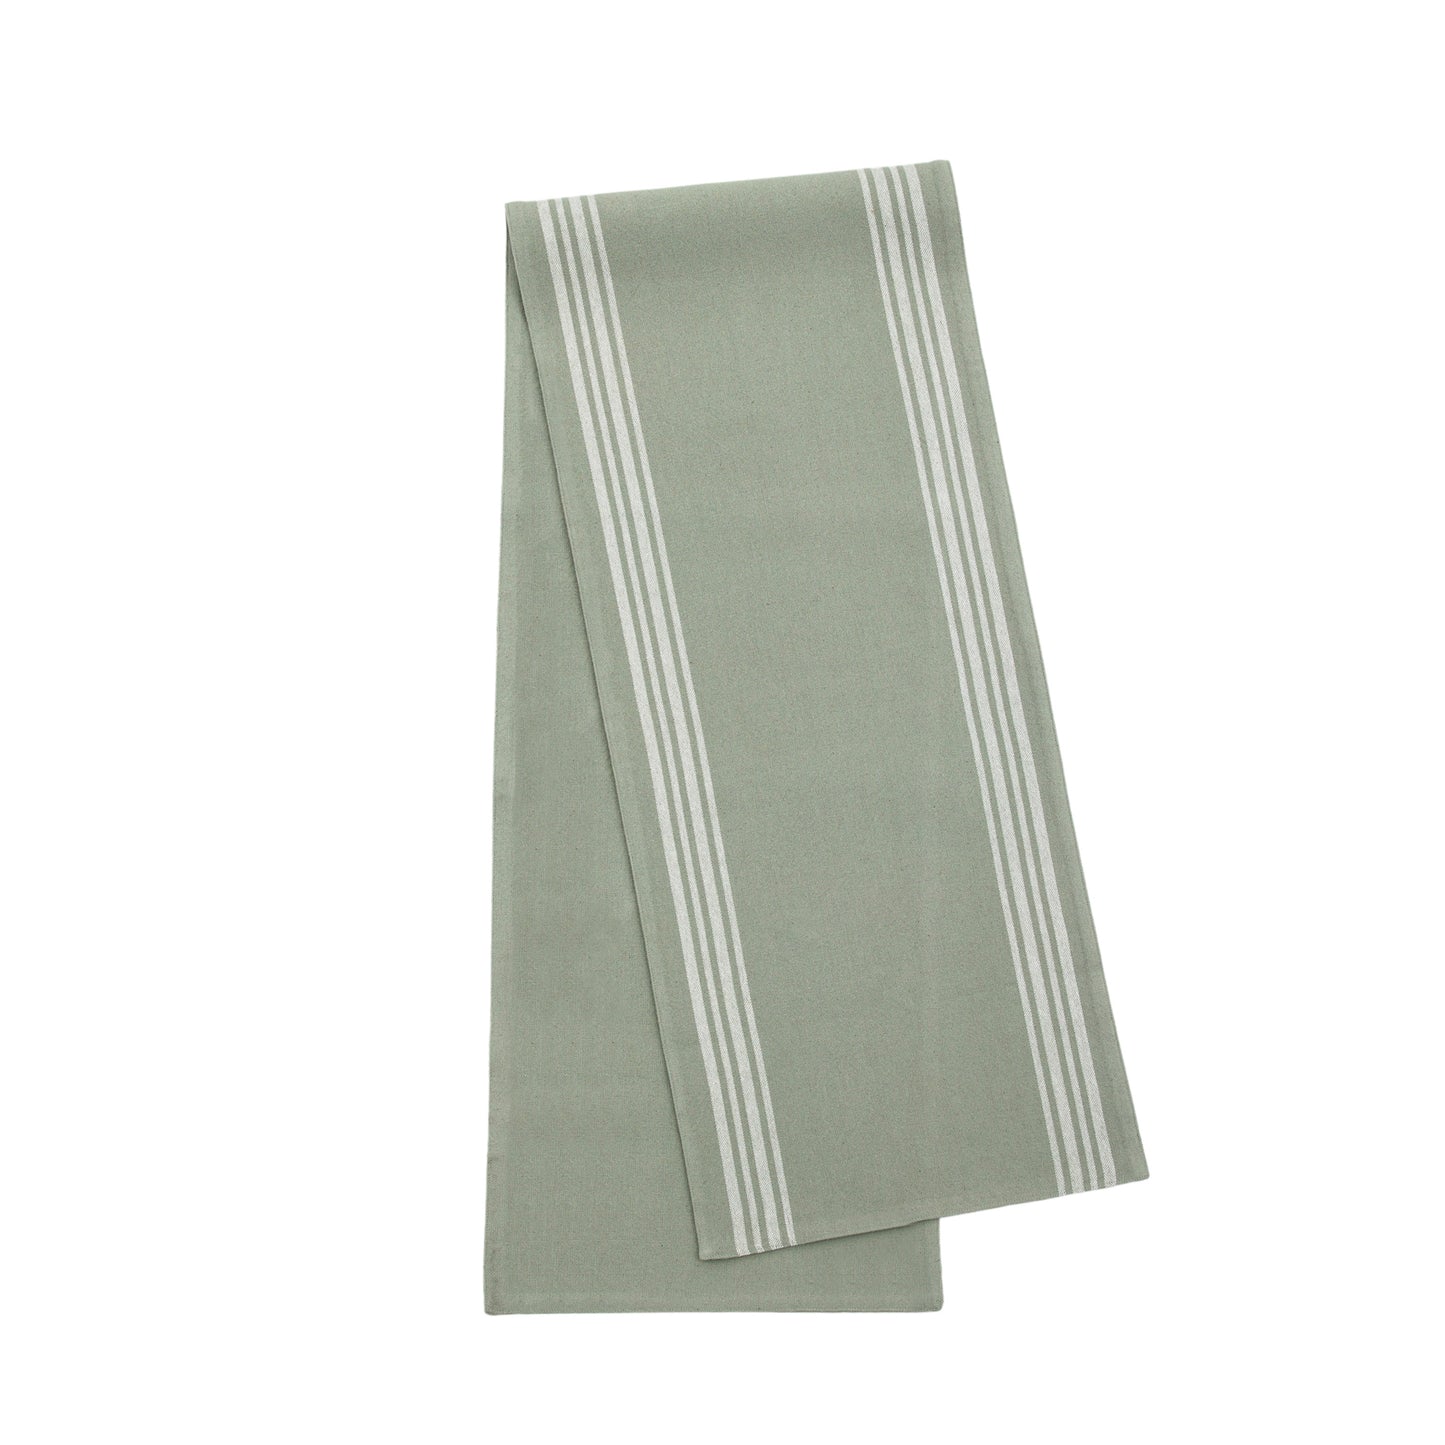 A Home furniture Table Runner in sage color from Kikiathome.co.uk, displayed on a white background.